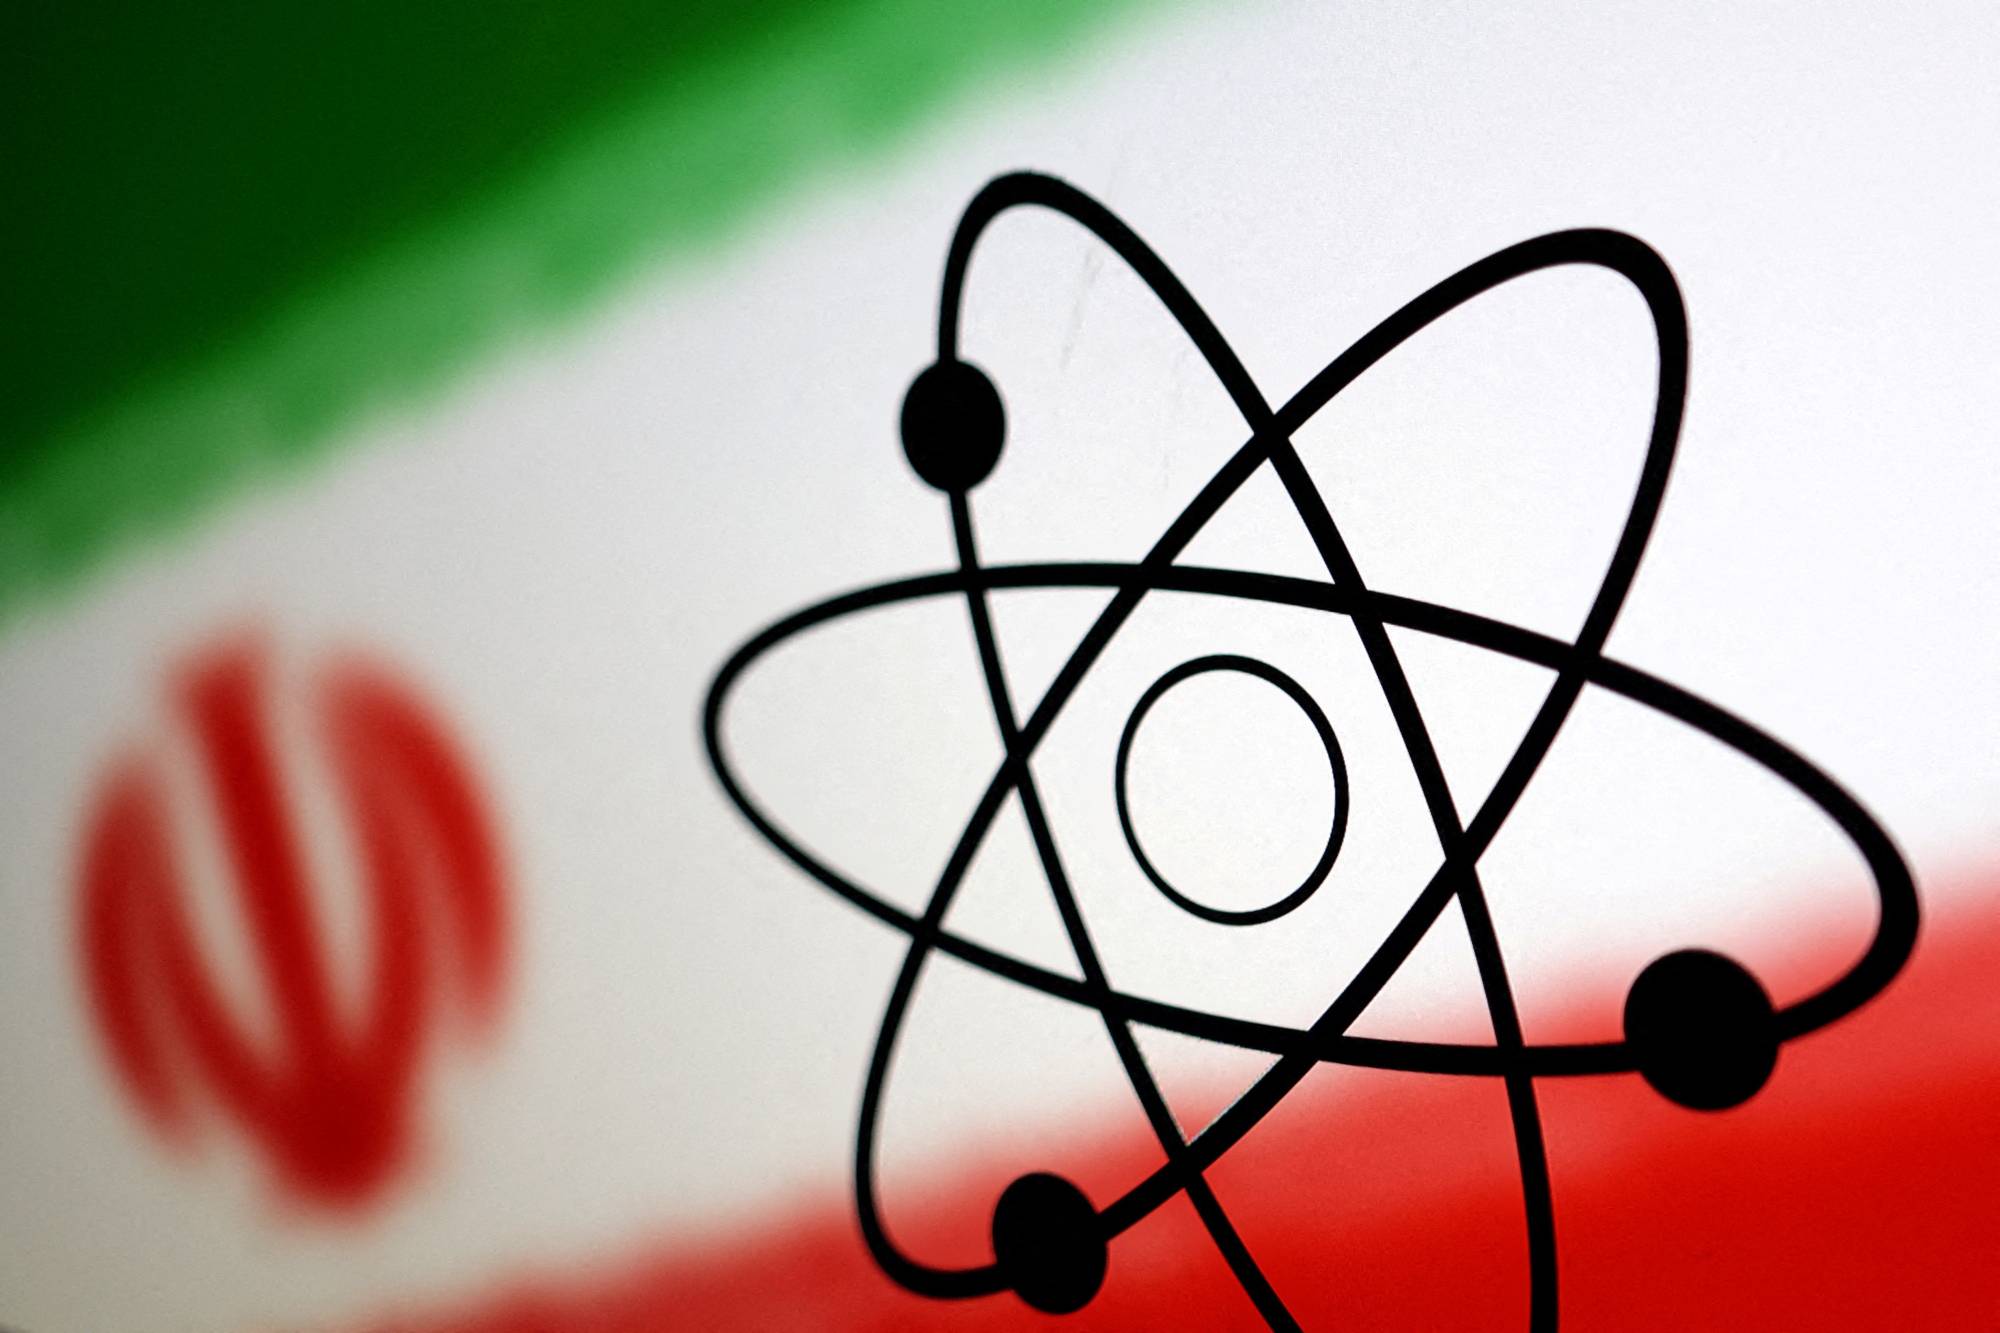 Western officials are concerned that a nuclear-armed Iran could threaten Israel, Gulf Arab oil producers, and spark a regional arms race. | REUTERS